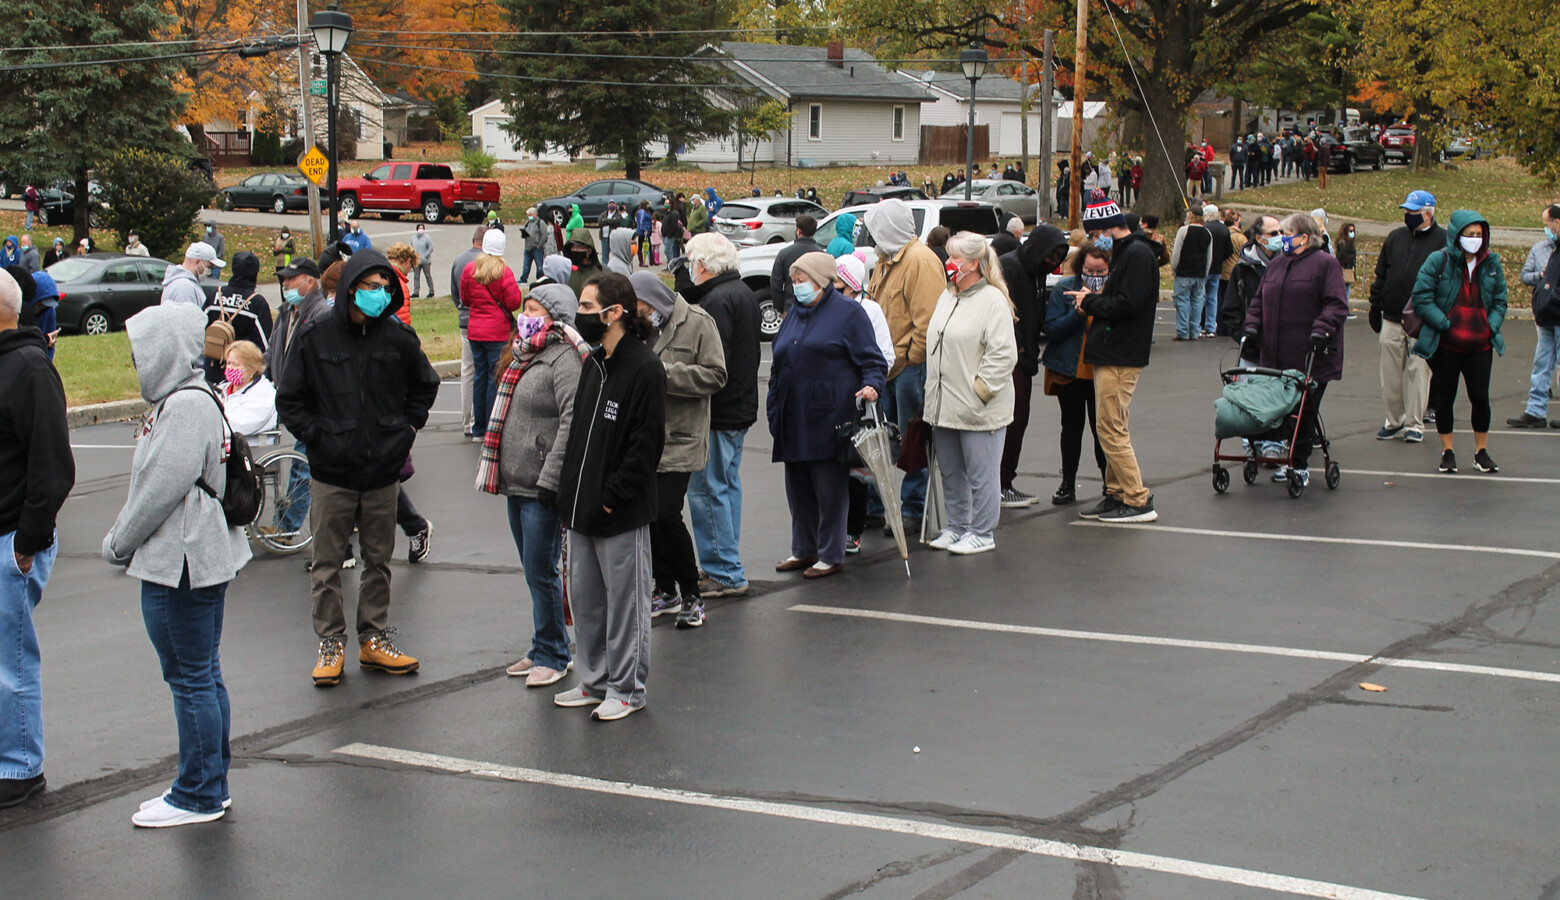 More than 400 people wait in line to vote early in Indianapolis. Indiana voters cannot ask state courts to extend polling hours on Election Day if there are problems at the polls, according to a 2019 Indiana law. (Lauren Chapman/IPB News)